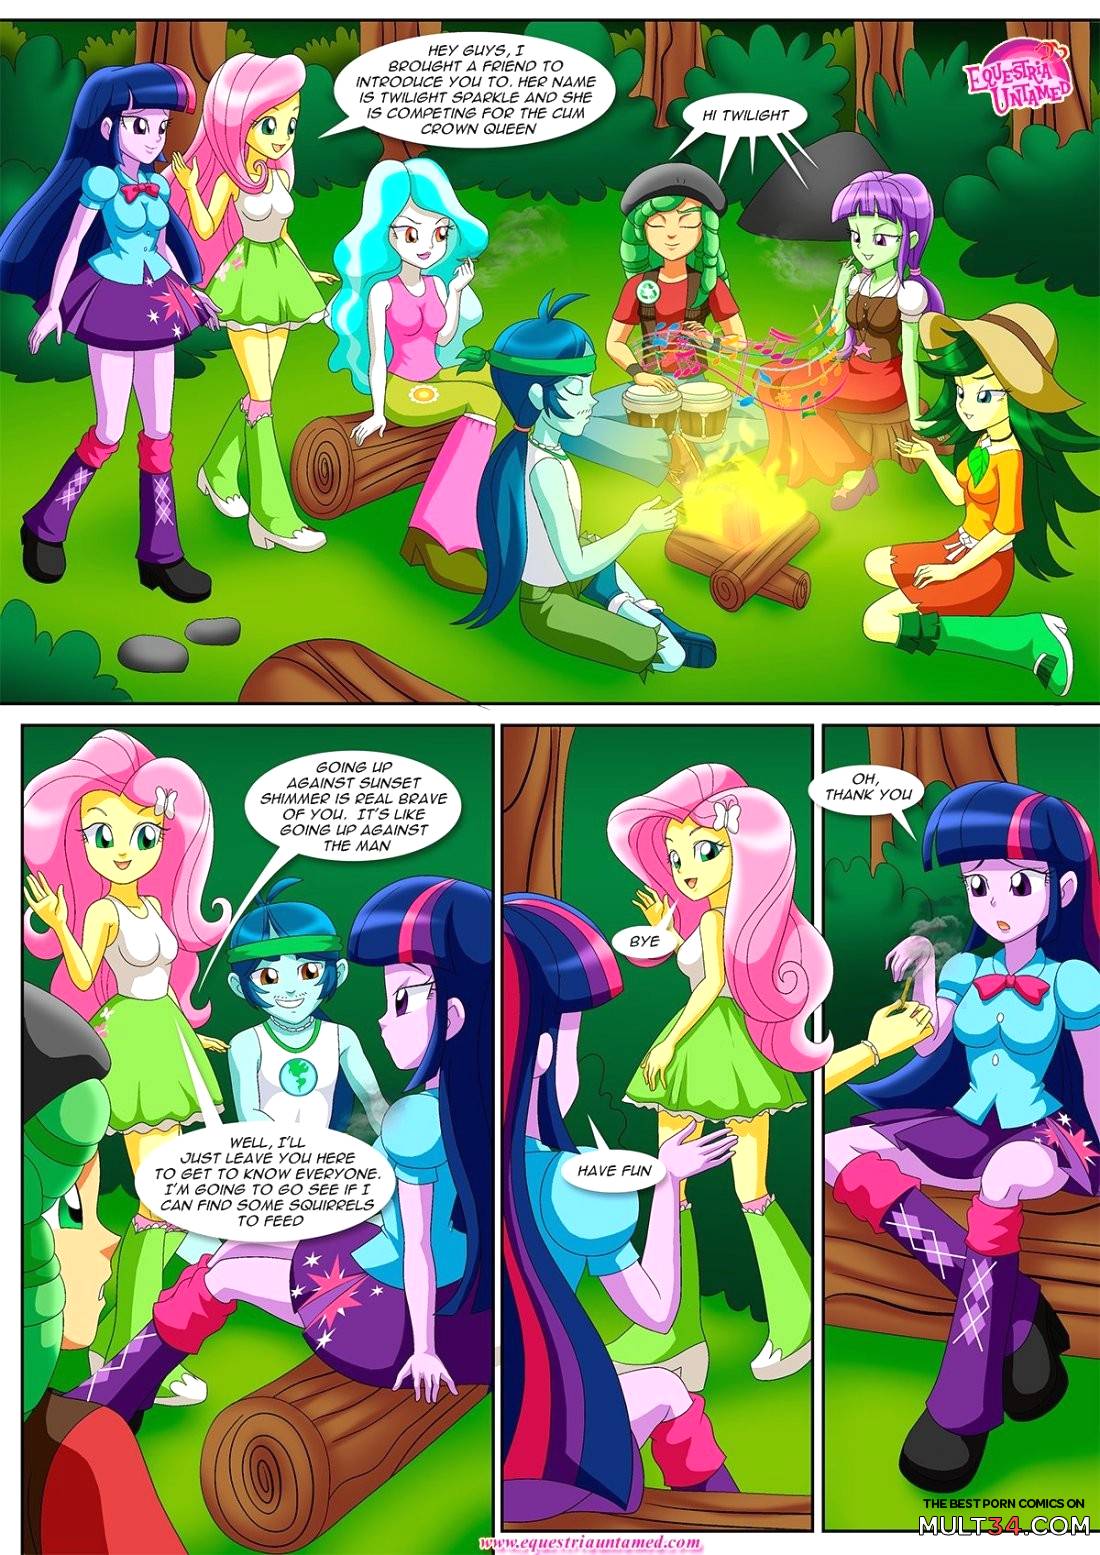 Equestria girls unleashed 2 page 5